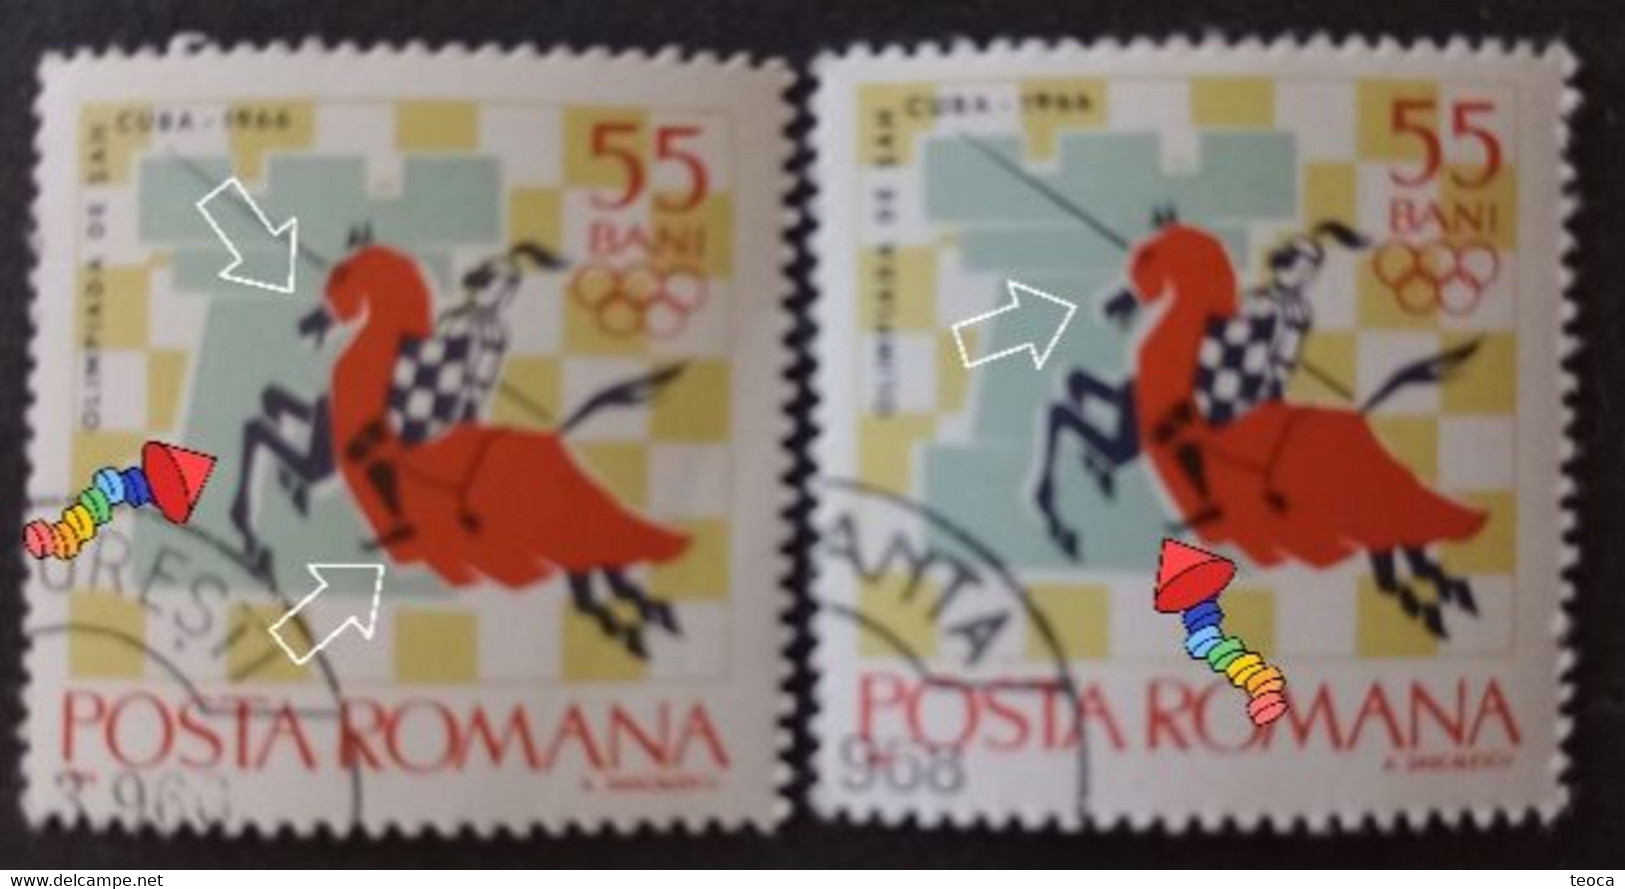 Stamps Errors Chess Romania 1966 MI 2480 Printed With Misplaced Chess Piece Used - Variedades Y Curiosidades